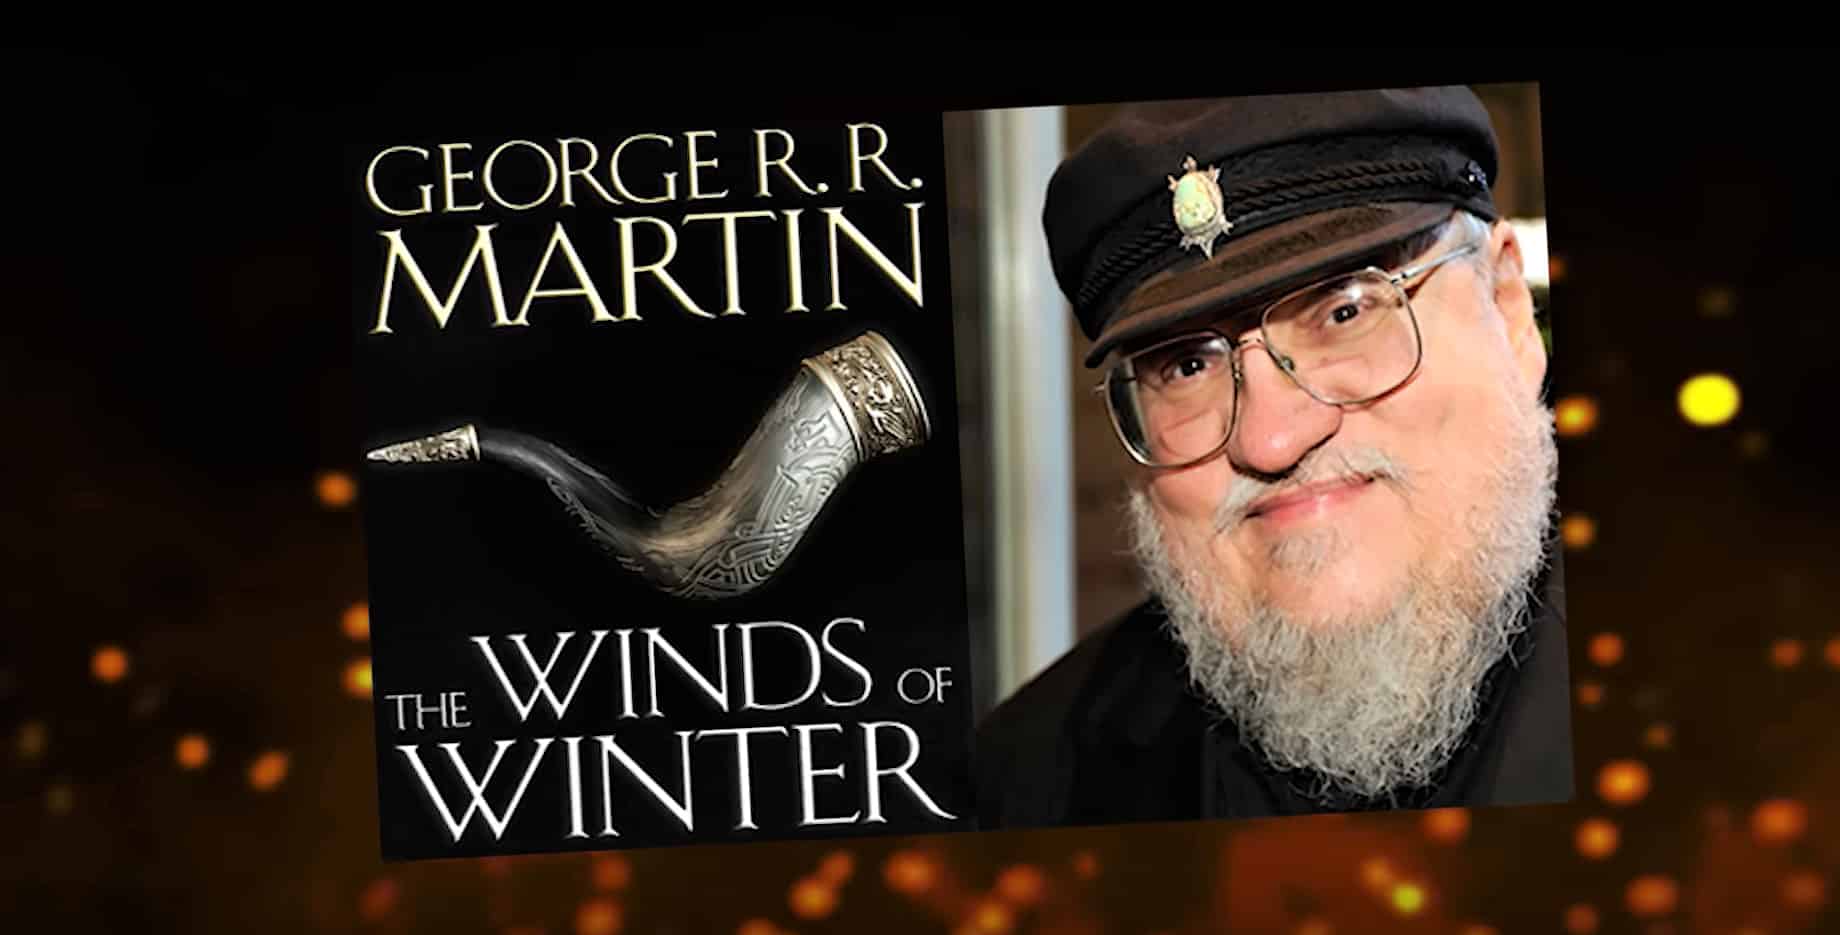 GRRM is not Close to Finish Winds of Winter